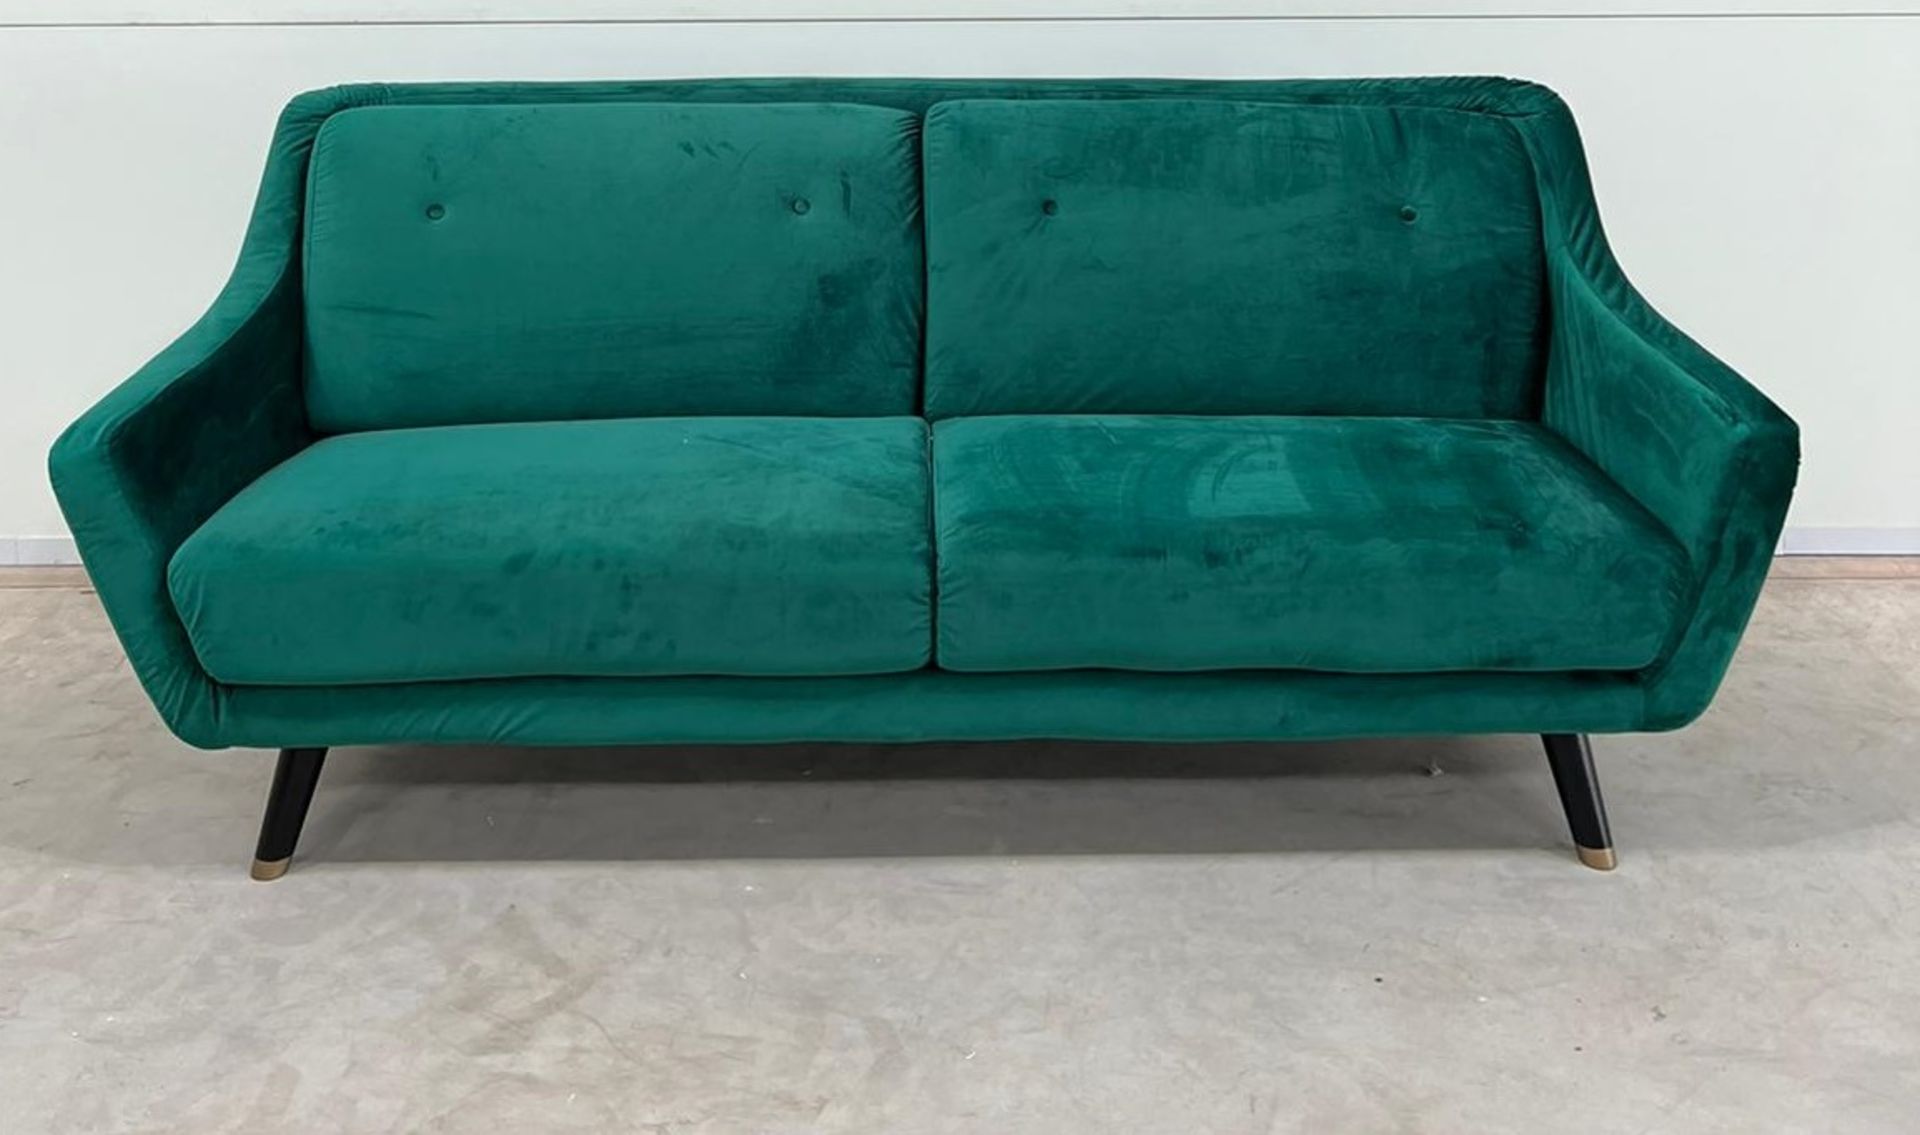 Lance Three Seater Sofa In Green Velvet Legs Finished In Black Legs This Welcoming Shape Is Hugged